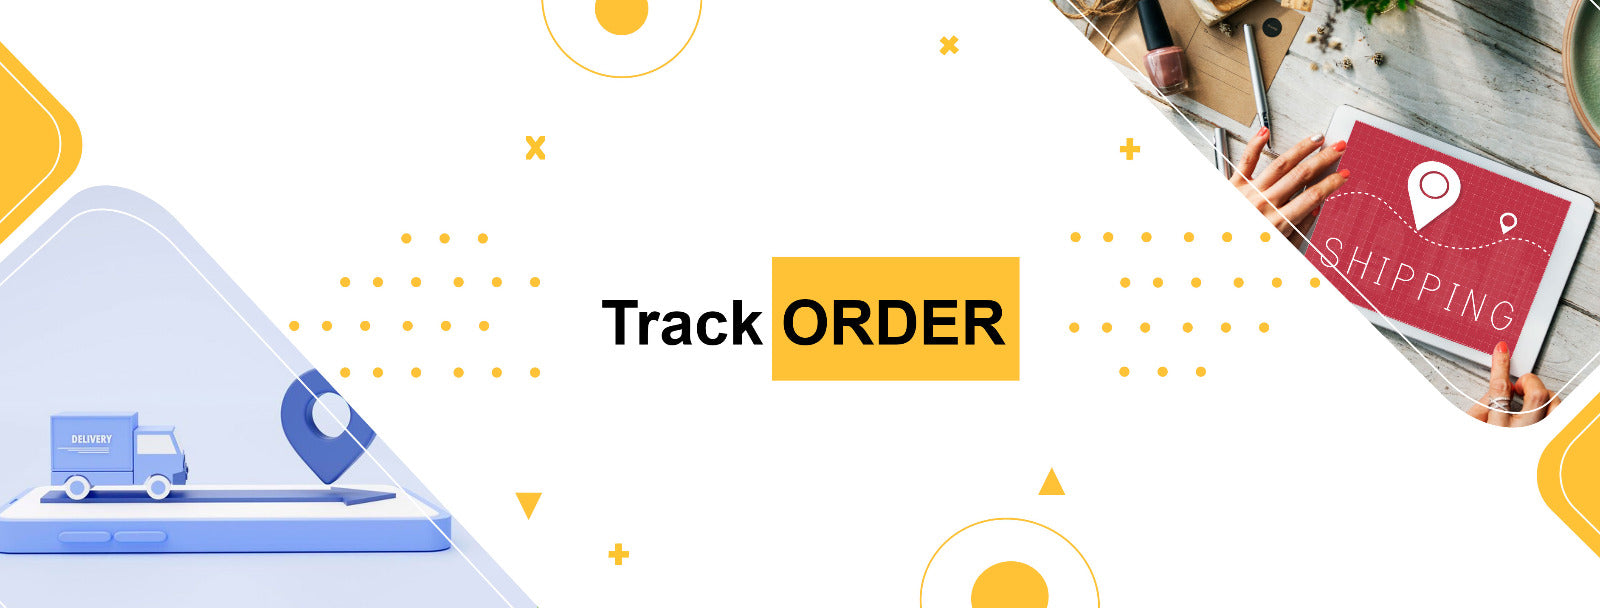 shoppingqueen-track-order